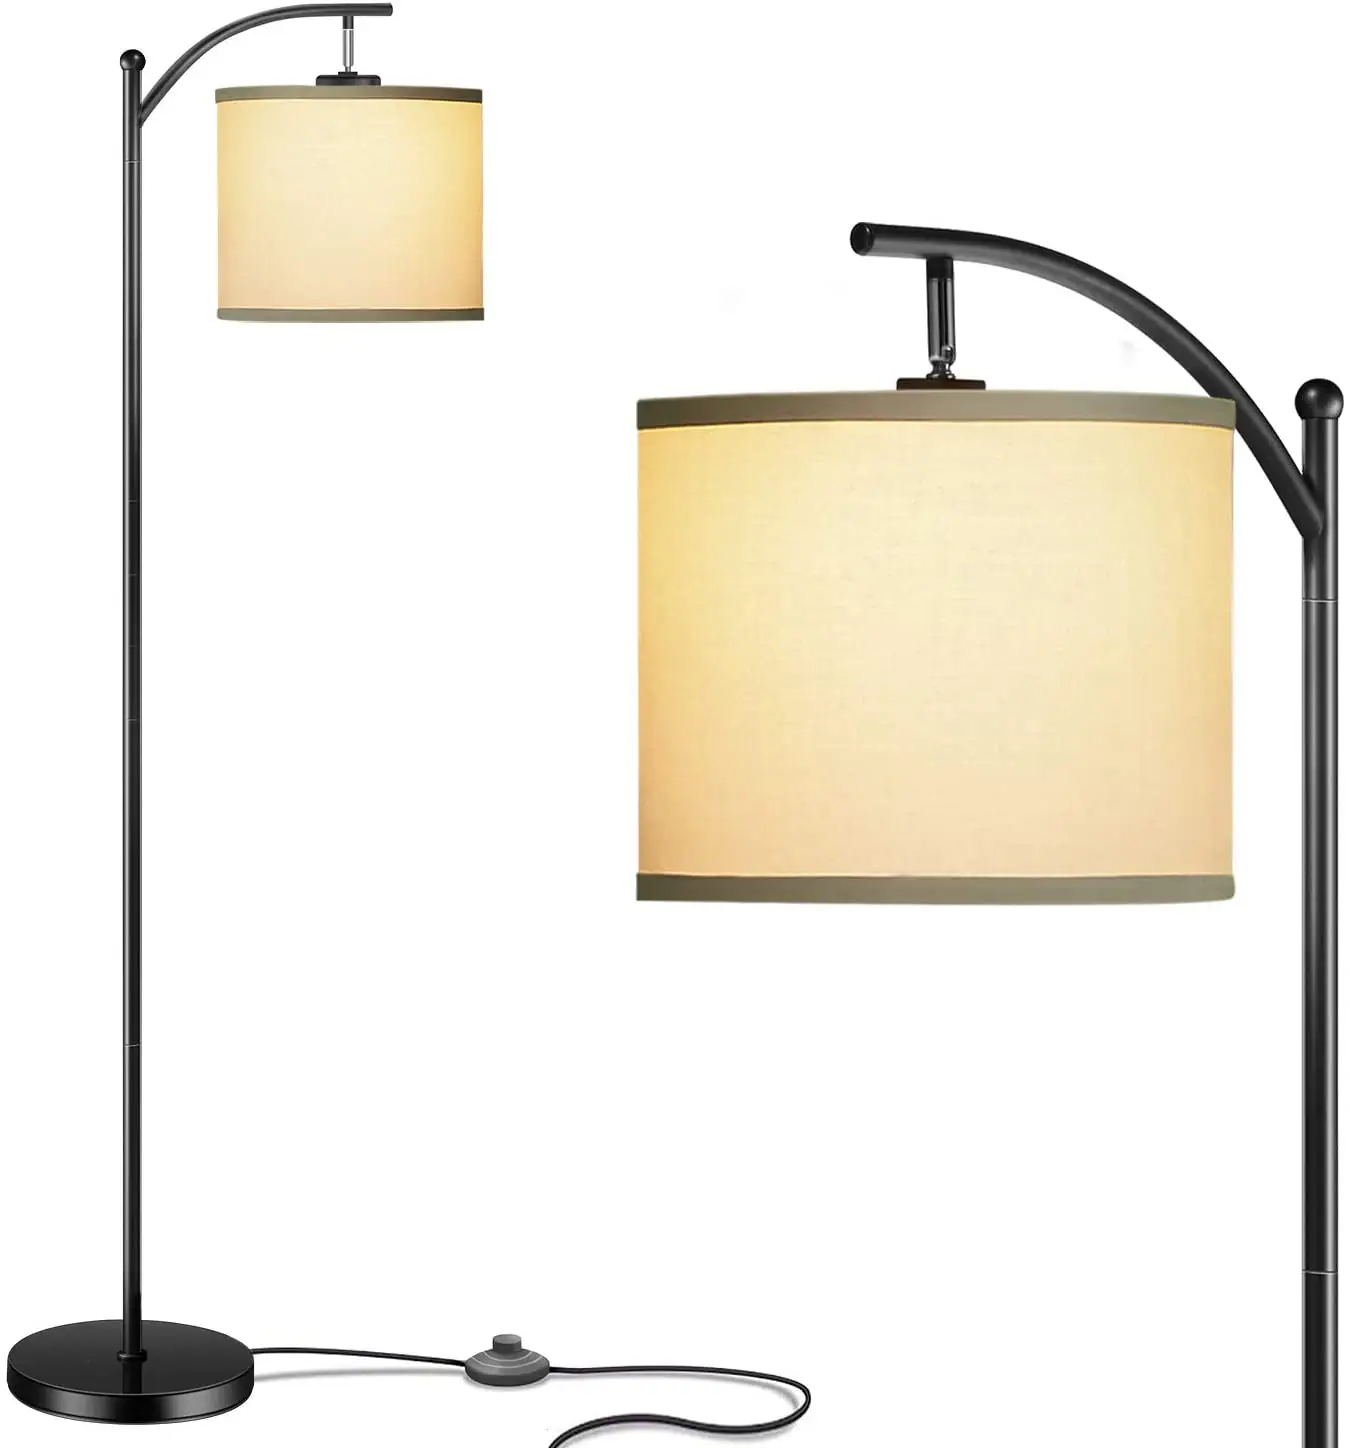 Standing Light Classic design Body Layer Modern Floor Lamps for Bedrooms Black and Silver